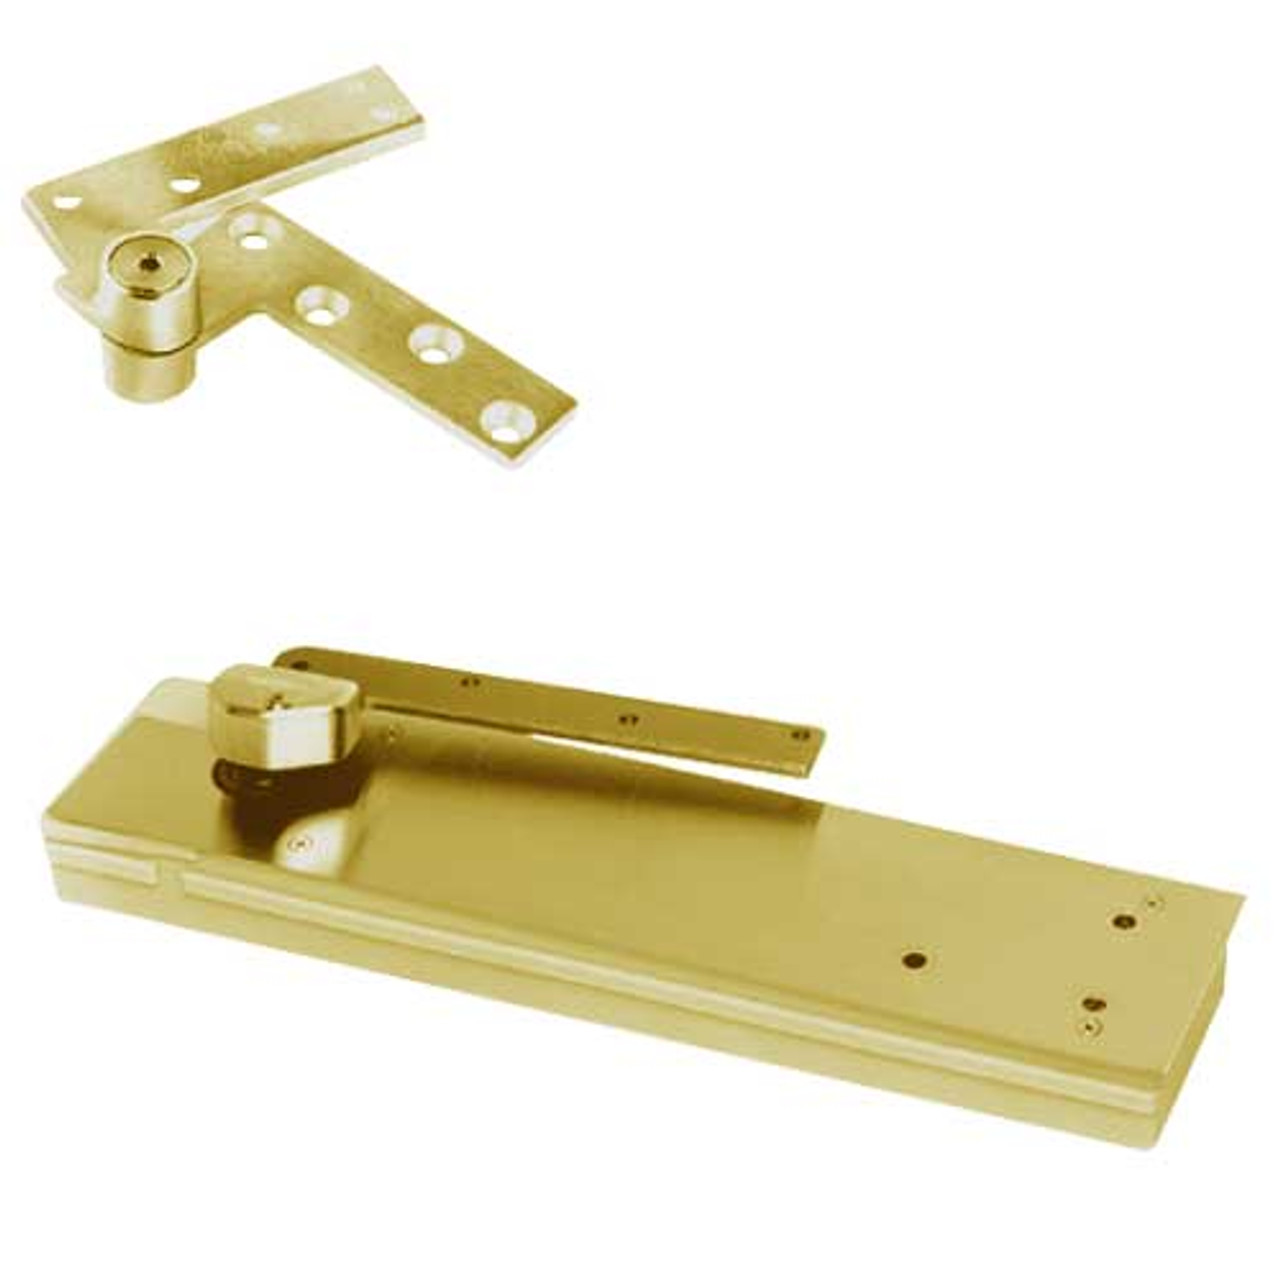 5103ABC105-RH-606 Rixson 51 Series 3/4" Offset Hung Shallow Depth Floor Closers in Satin Brass Finish